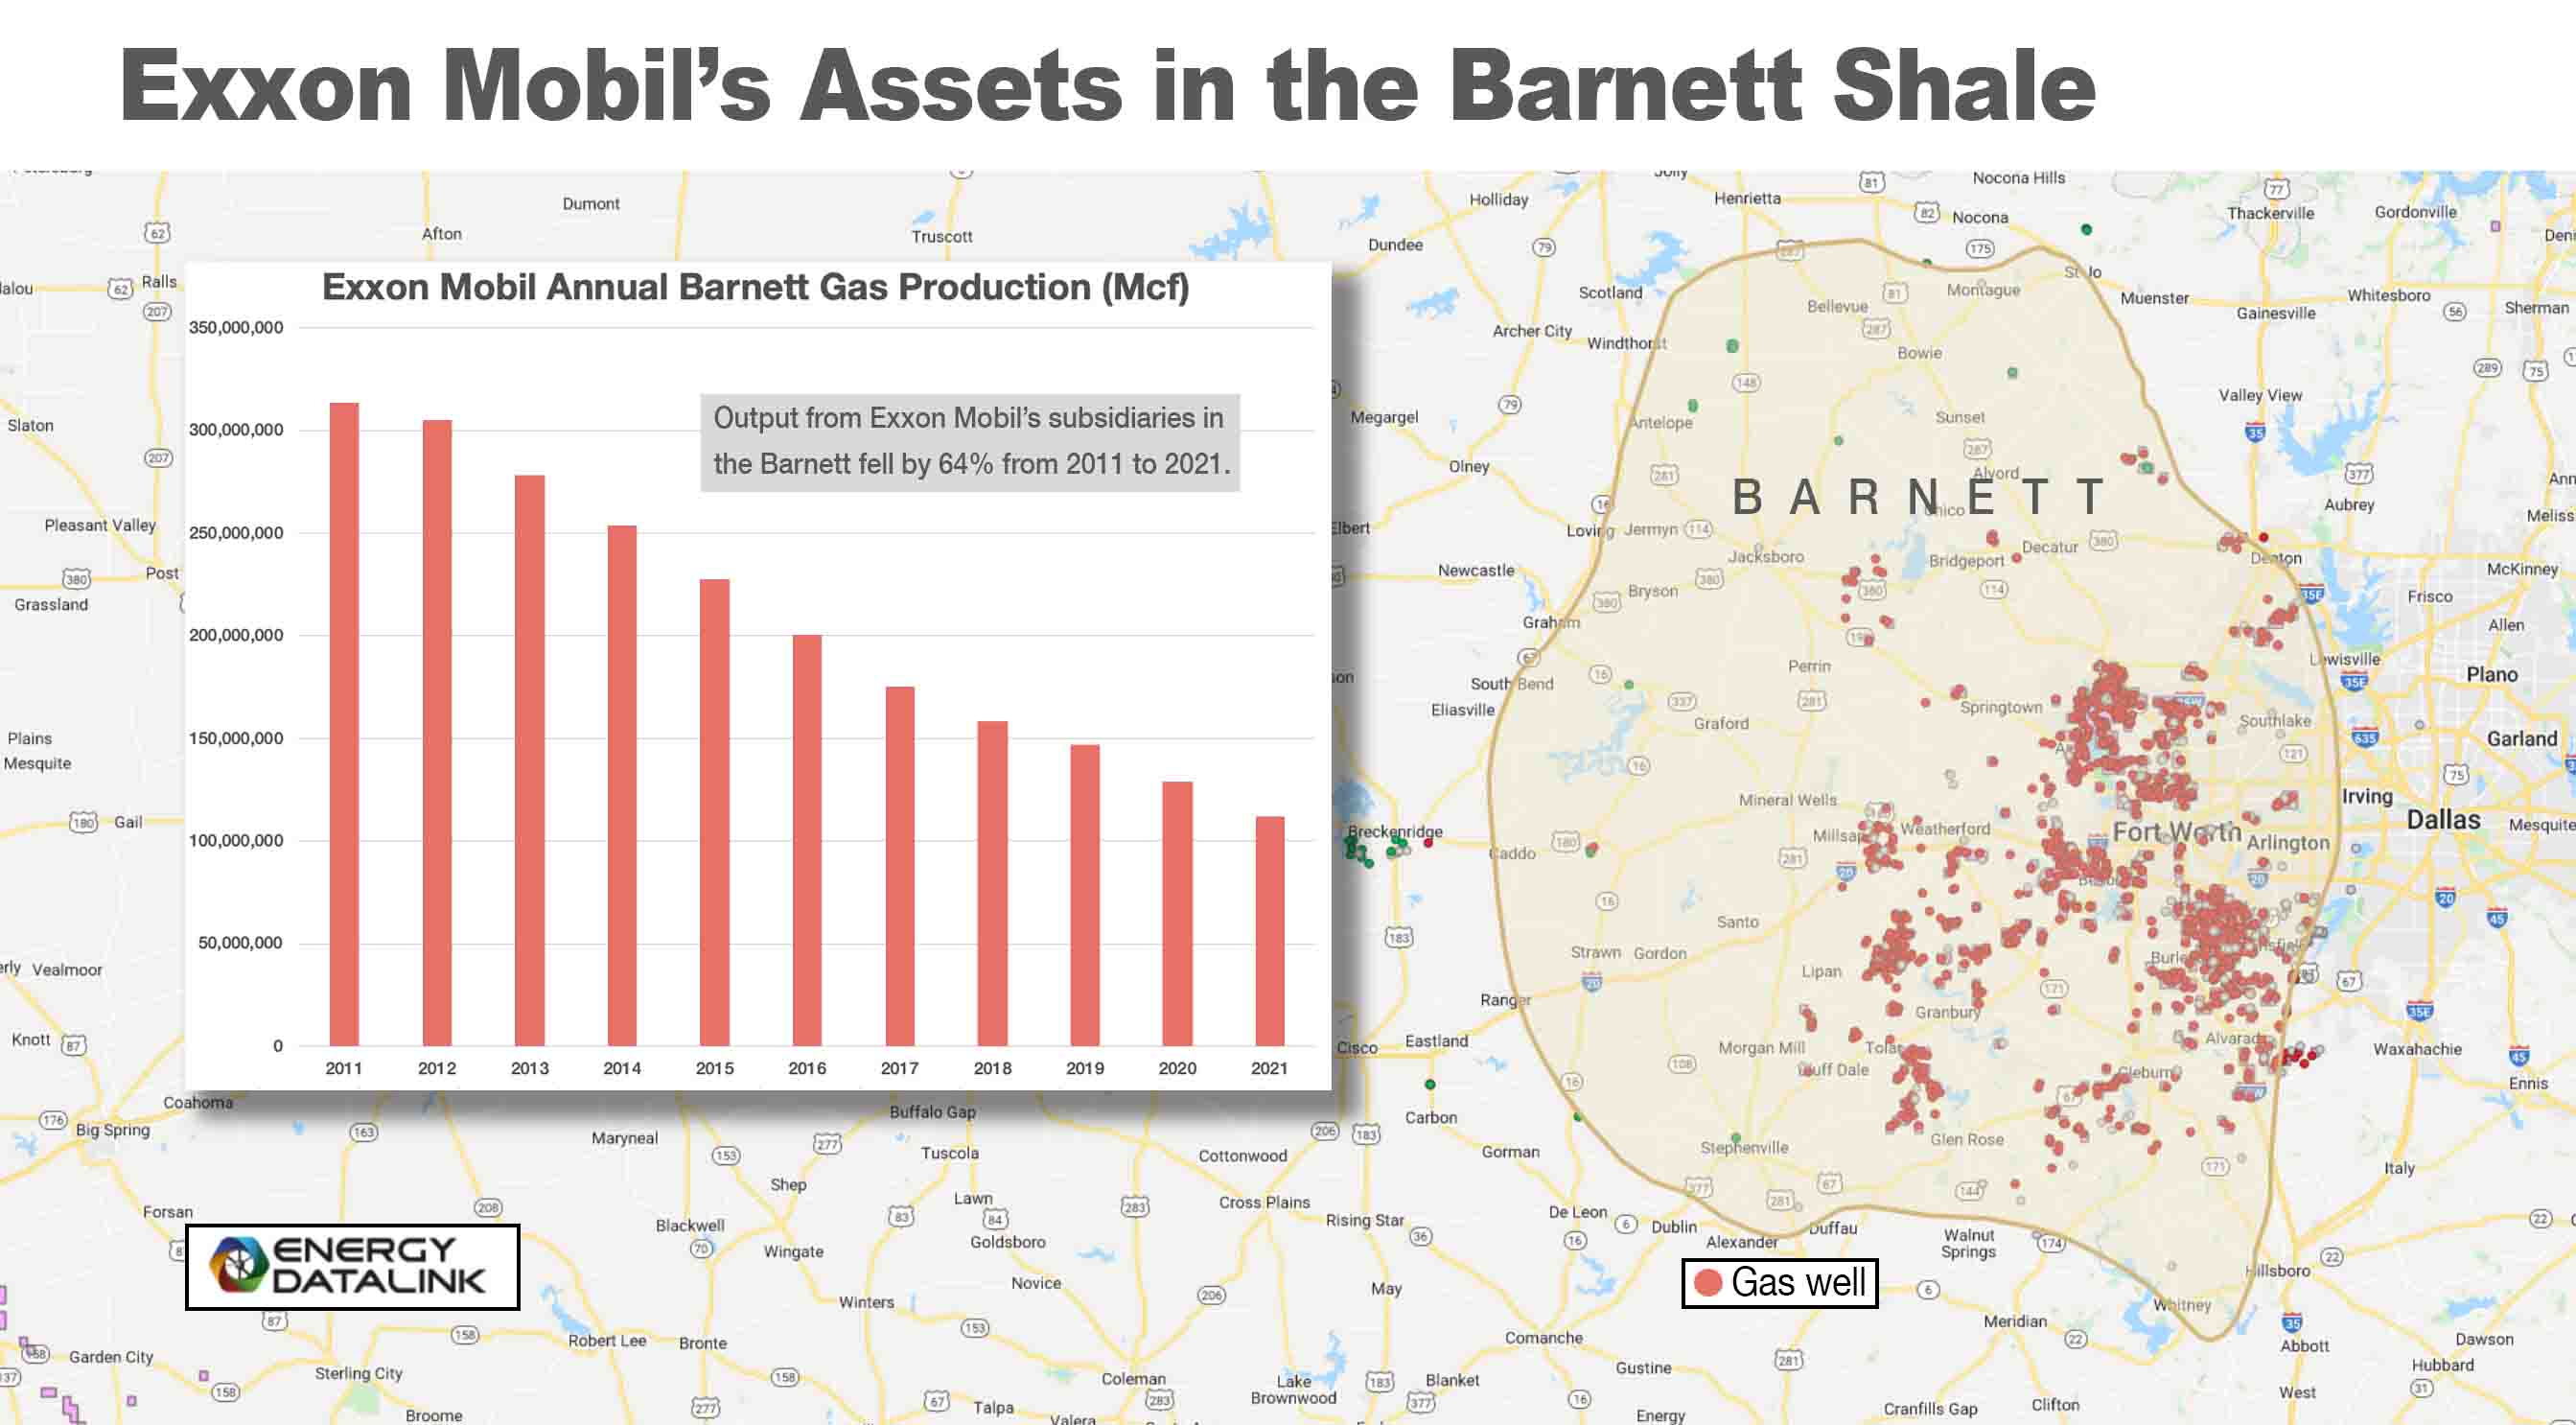 Exxon Mobil Map of assets in the Barnett Shale